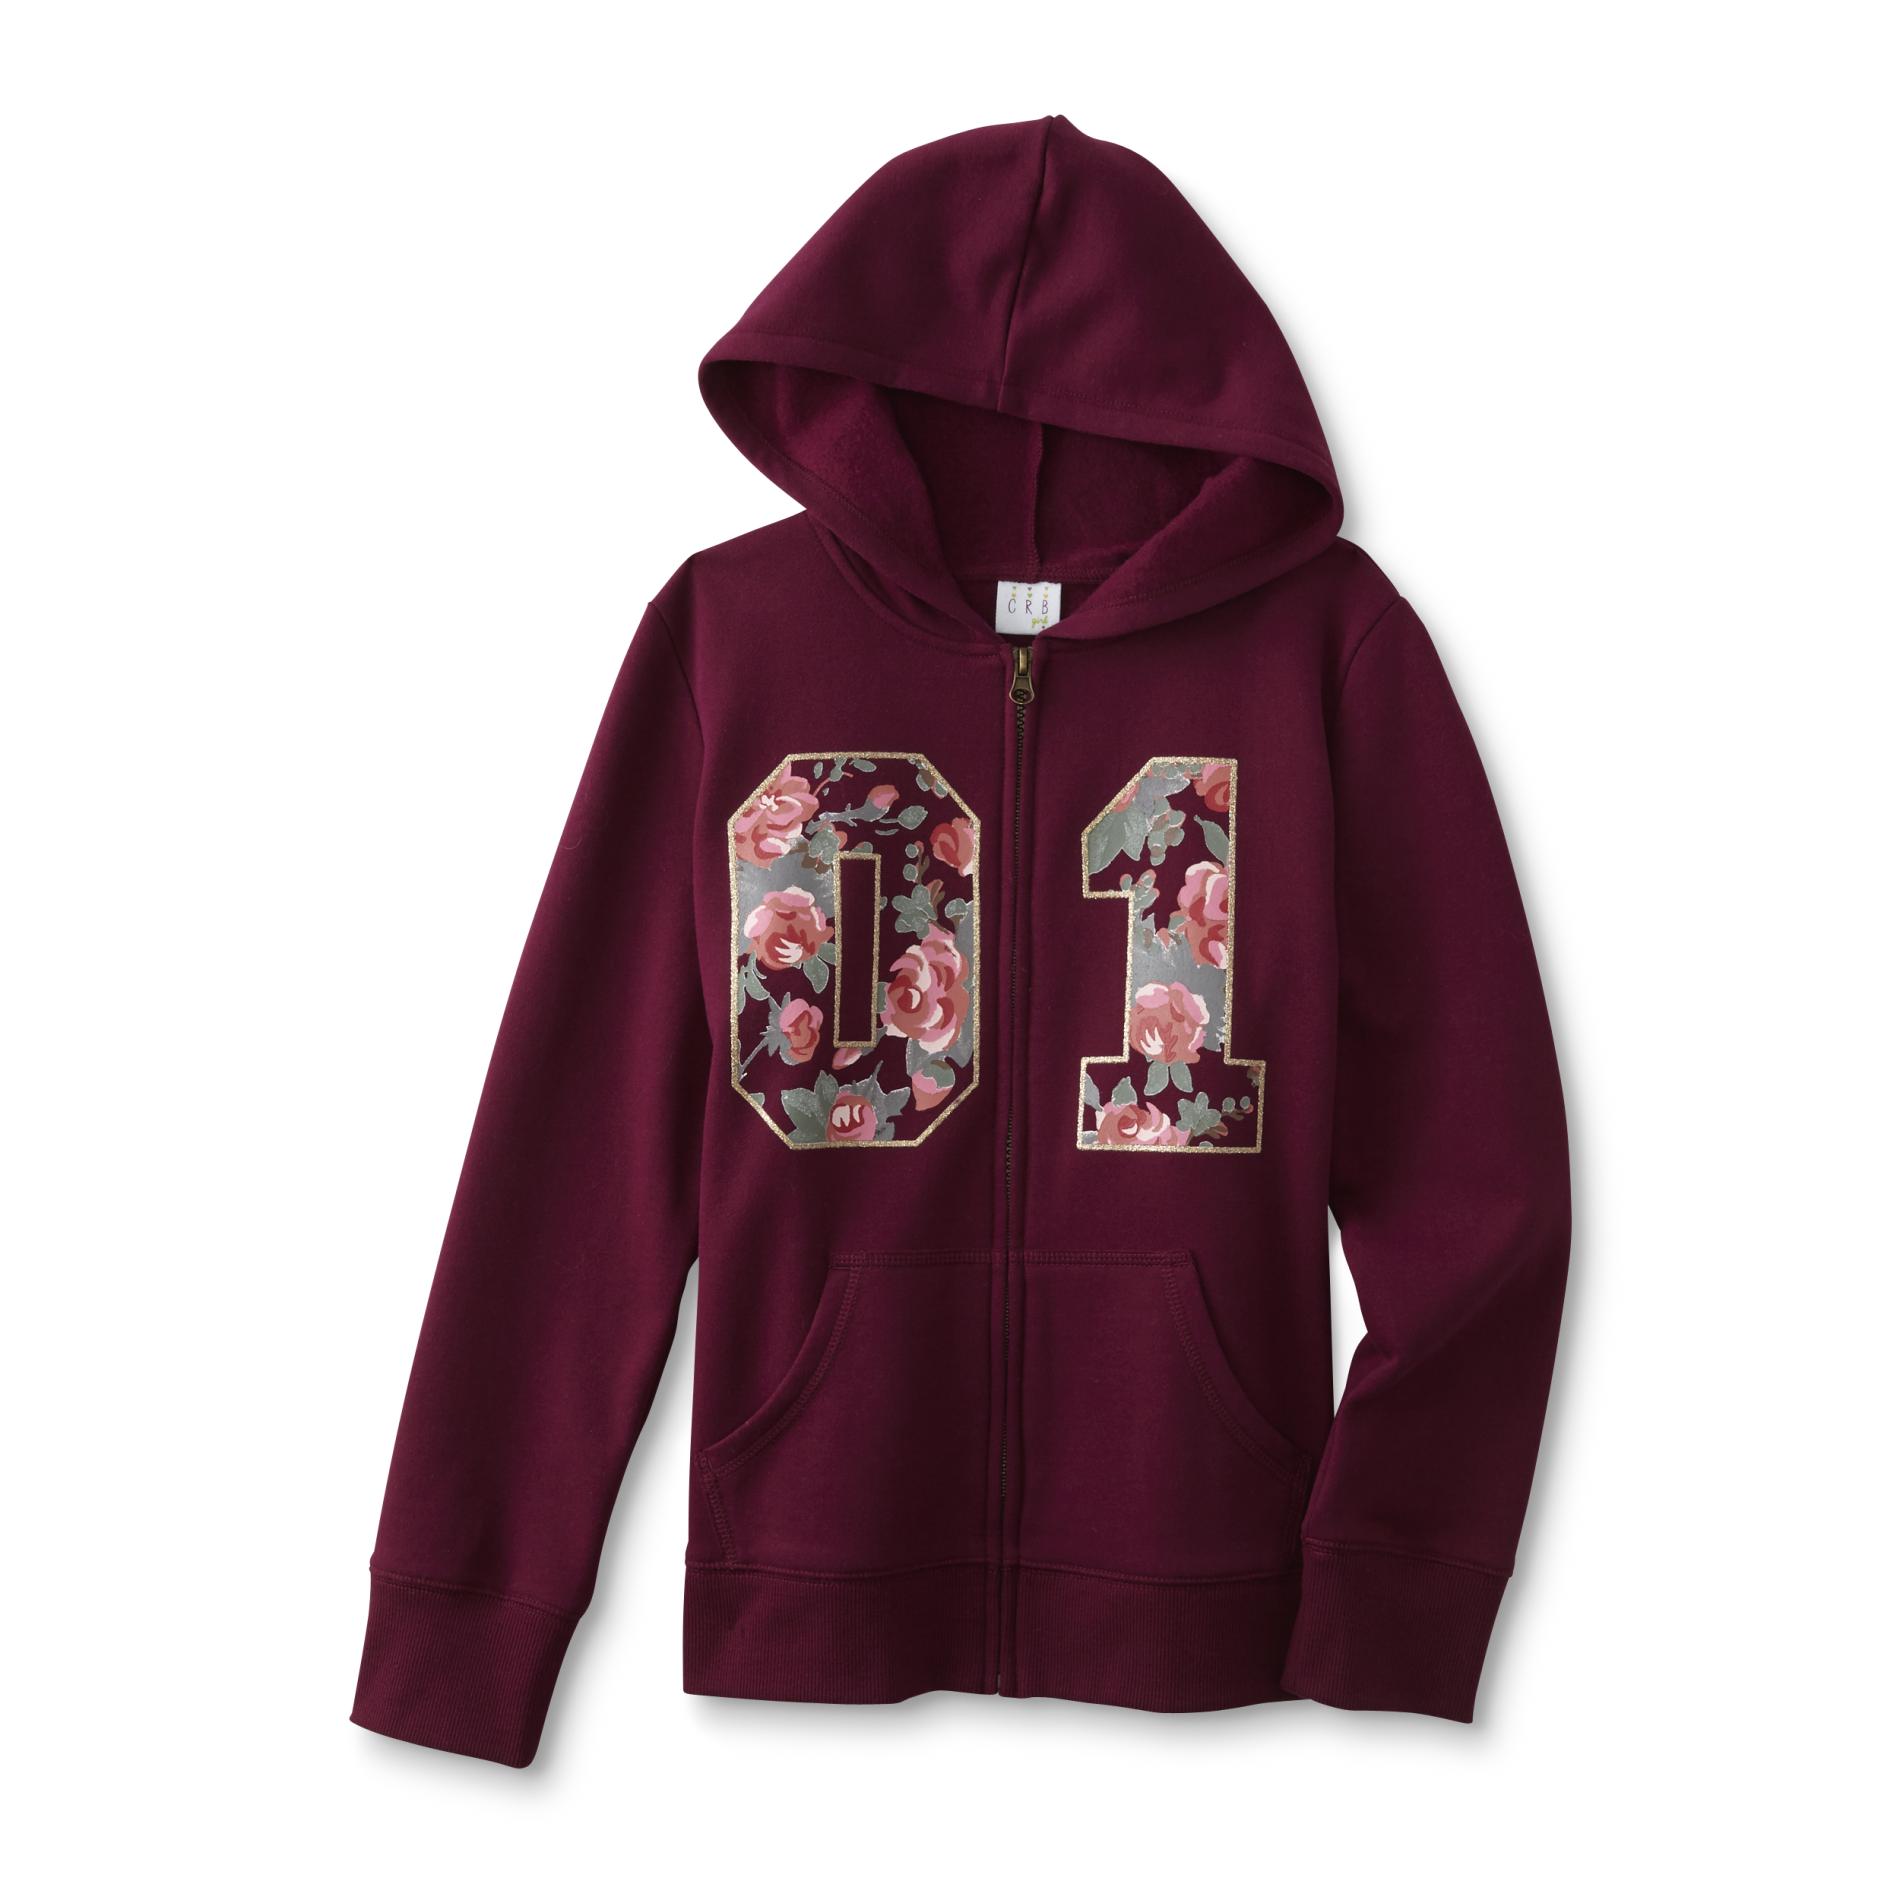 CRB Girl Girl's Graphic Hoodie Jacket - Floral